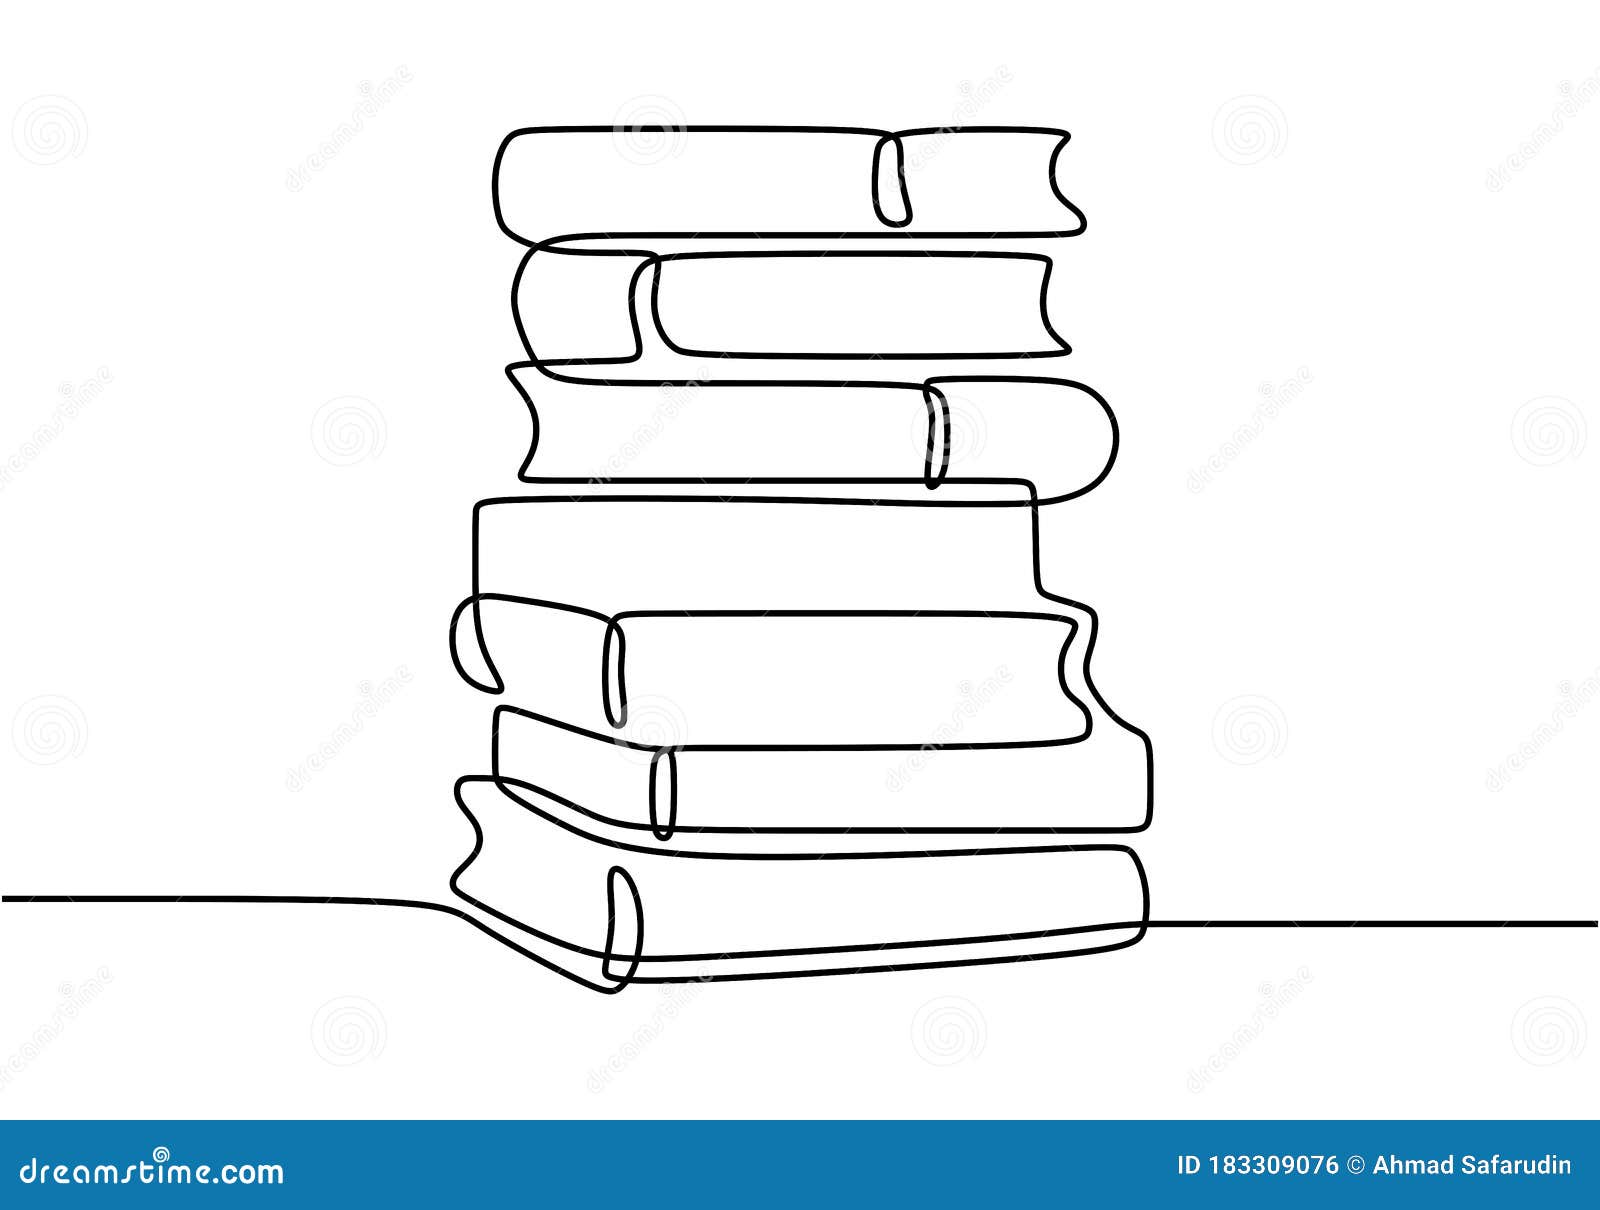 One Line Drawing Of Pile Of Books Stack Of Book On Desk Tidy Books Lined Up Happy Study With Reading The Book Single Hand Stock Vector Illustration Of School Person